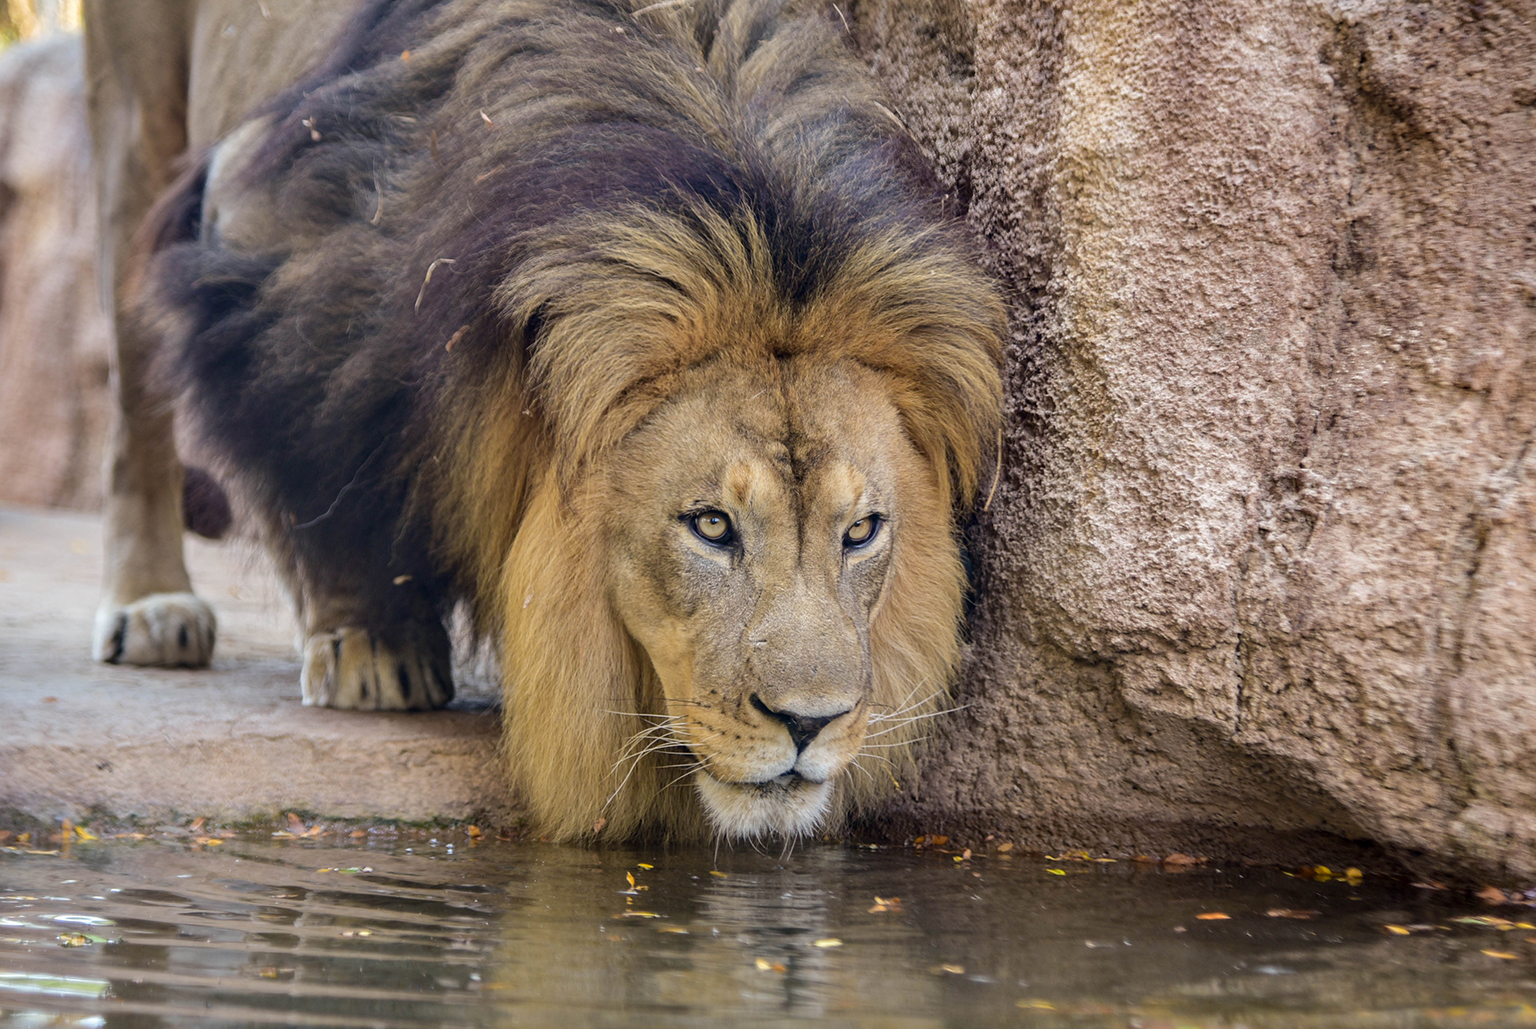 Incredible Compilation of Over 999 Lion Images - Stunning Lion Images ...